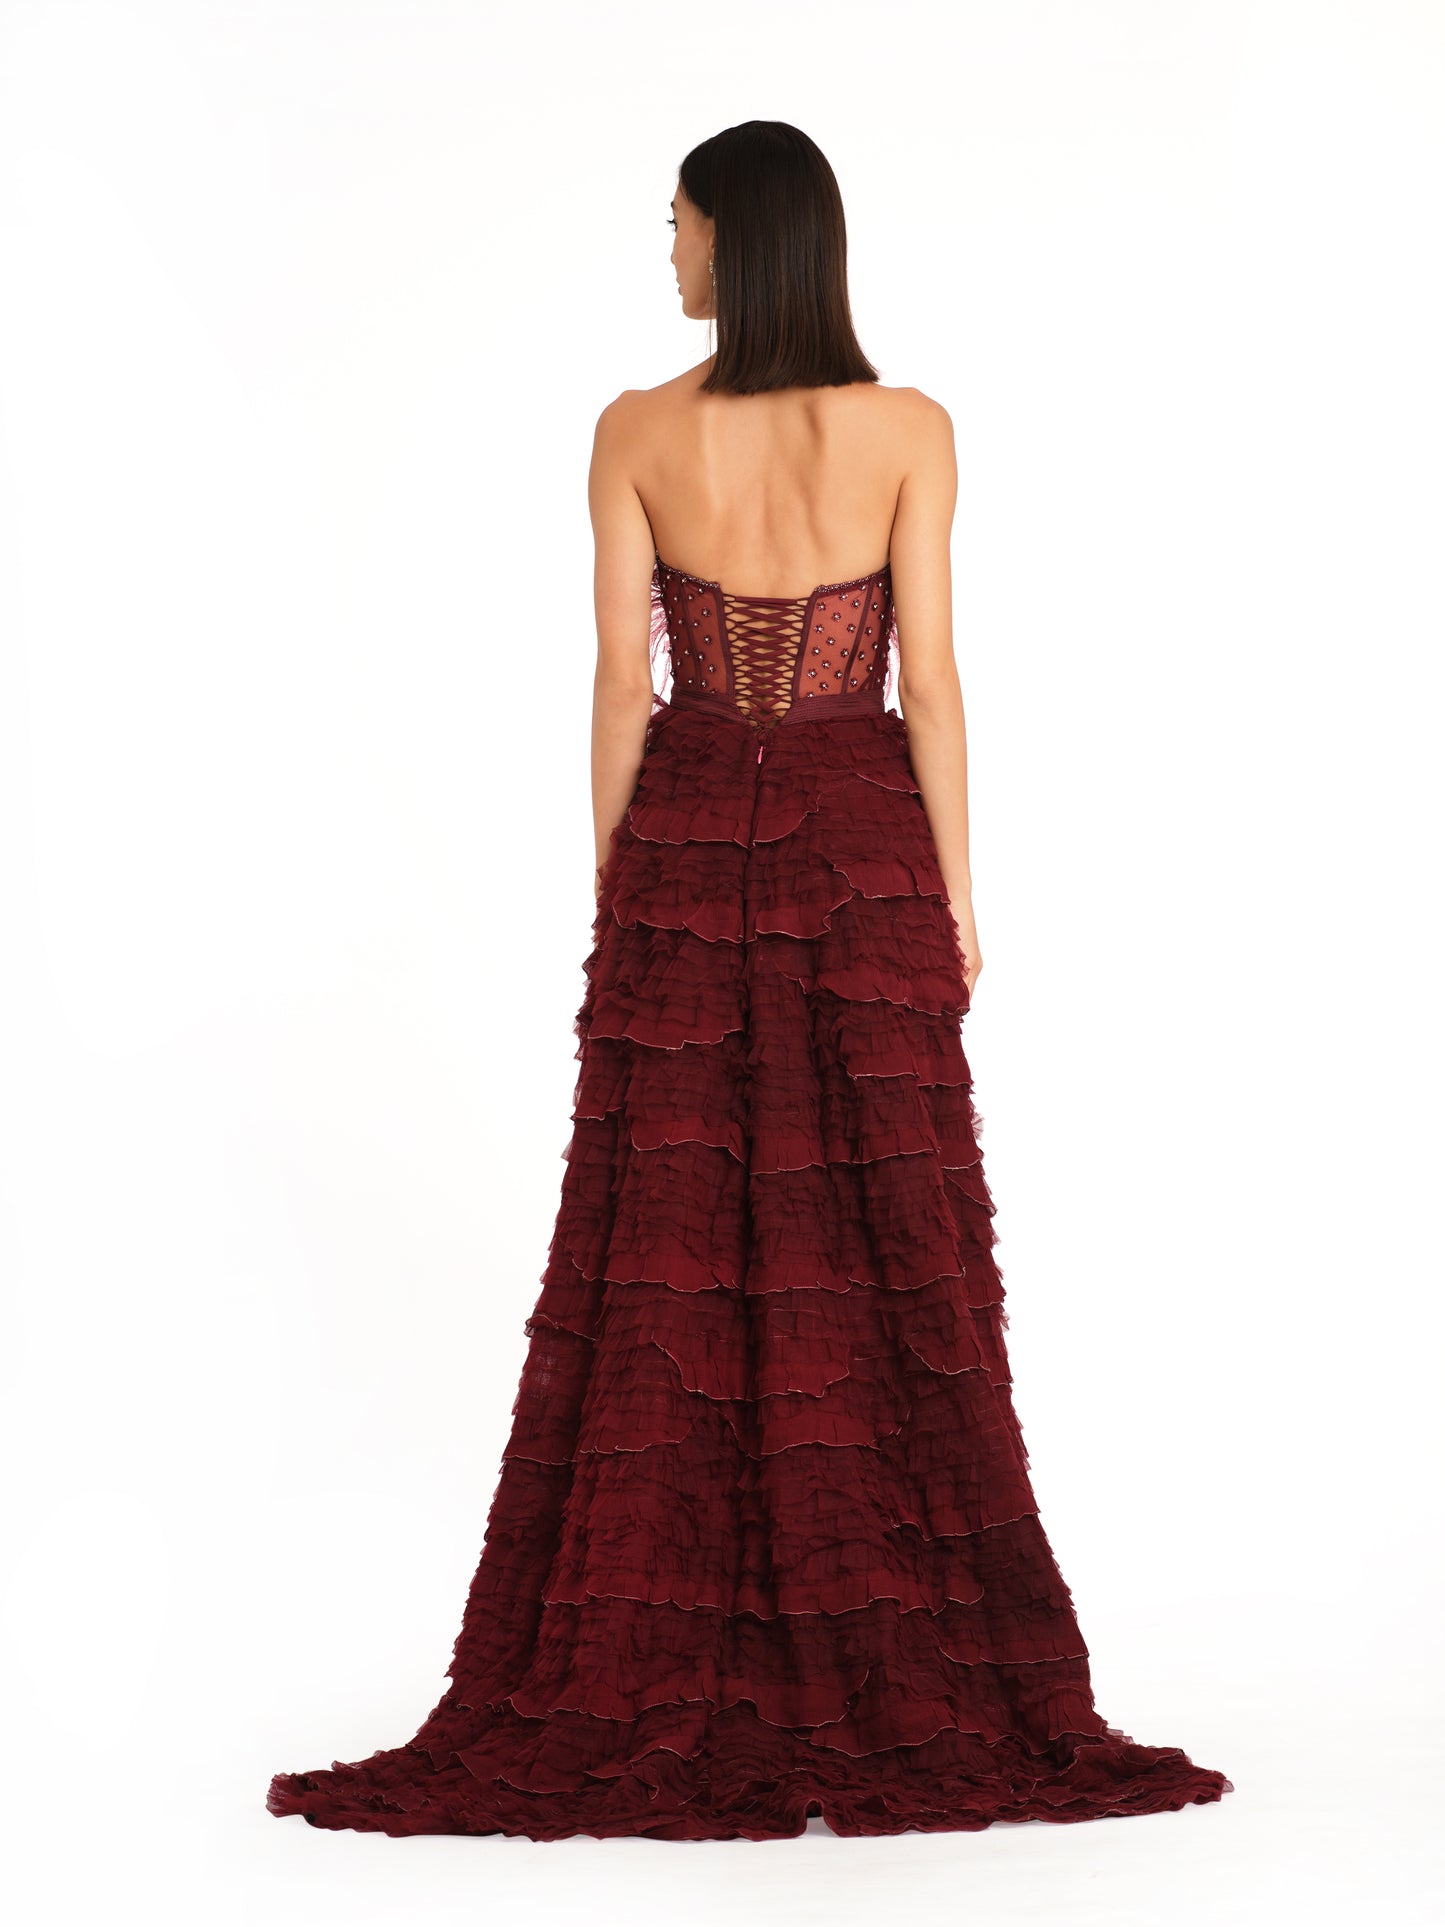 Burgundy Corset Gown with Frill Detailing